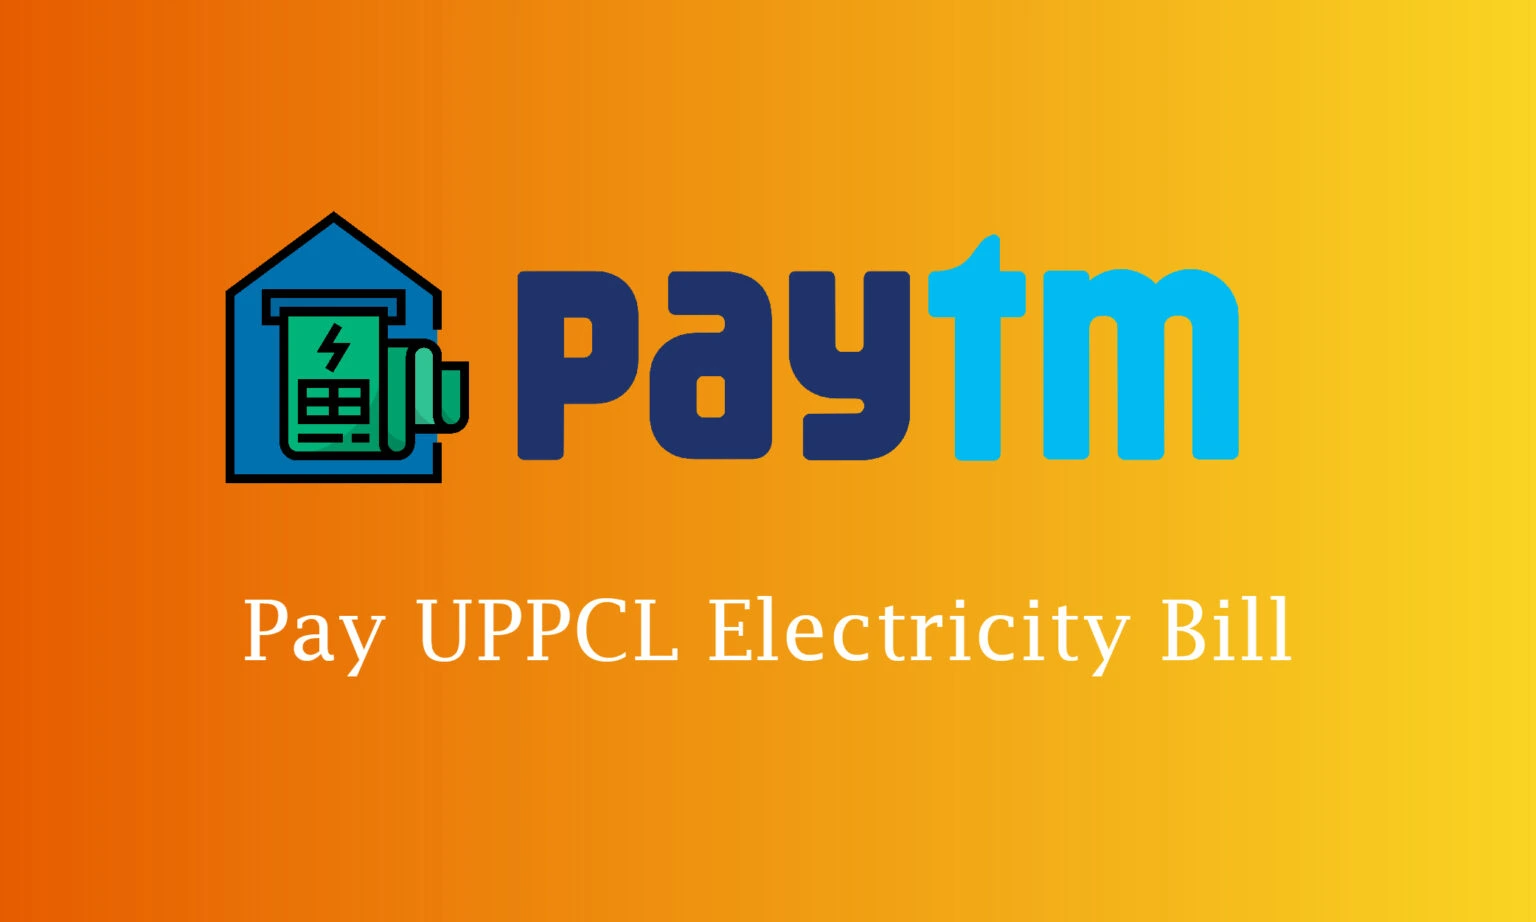 How to Pay UPPCL Electricity Bill by Paytm